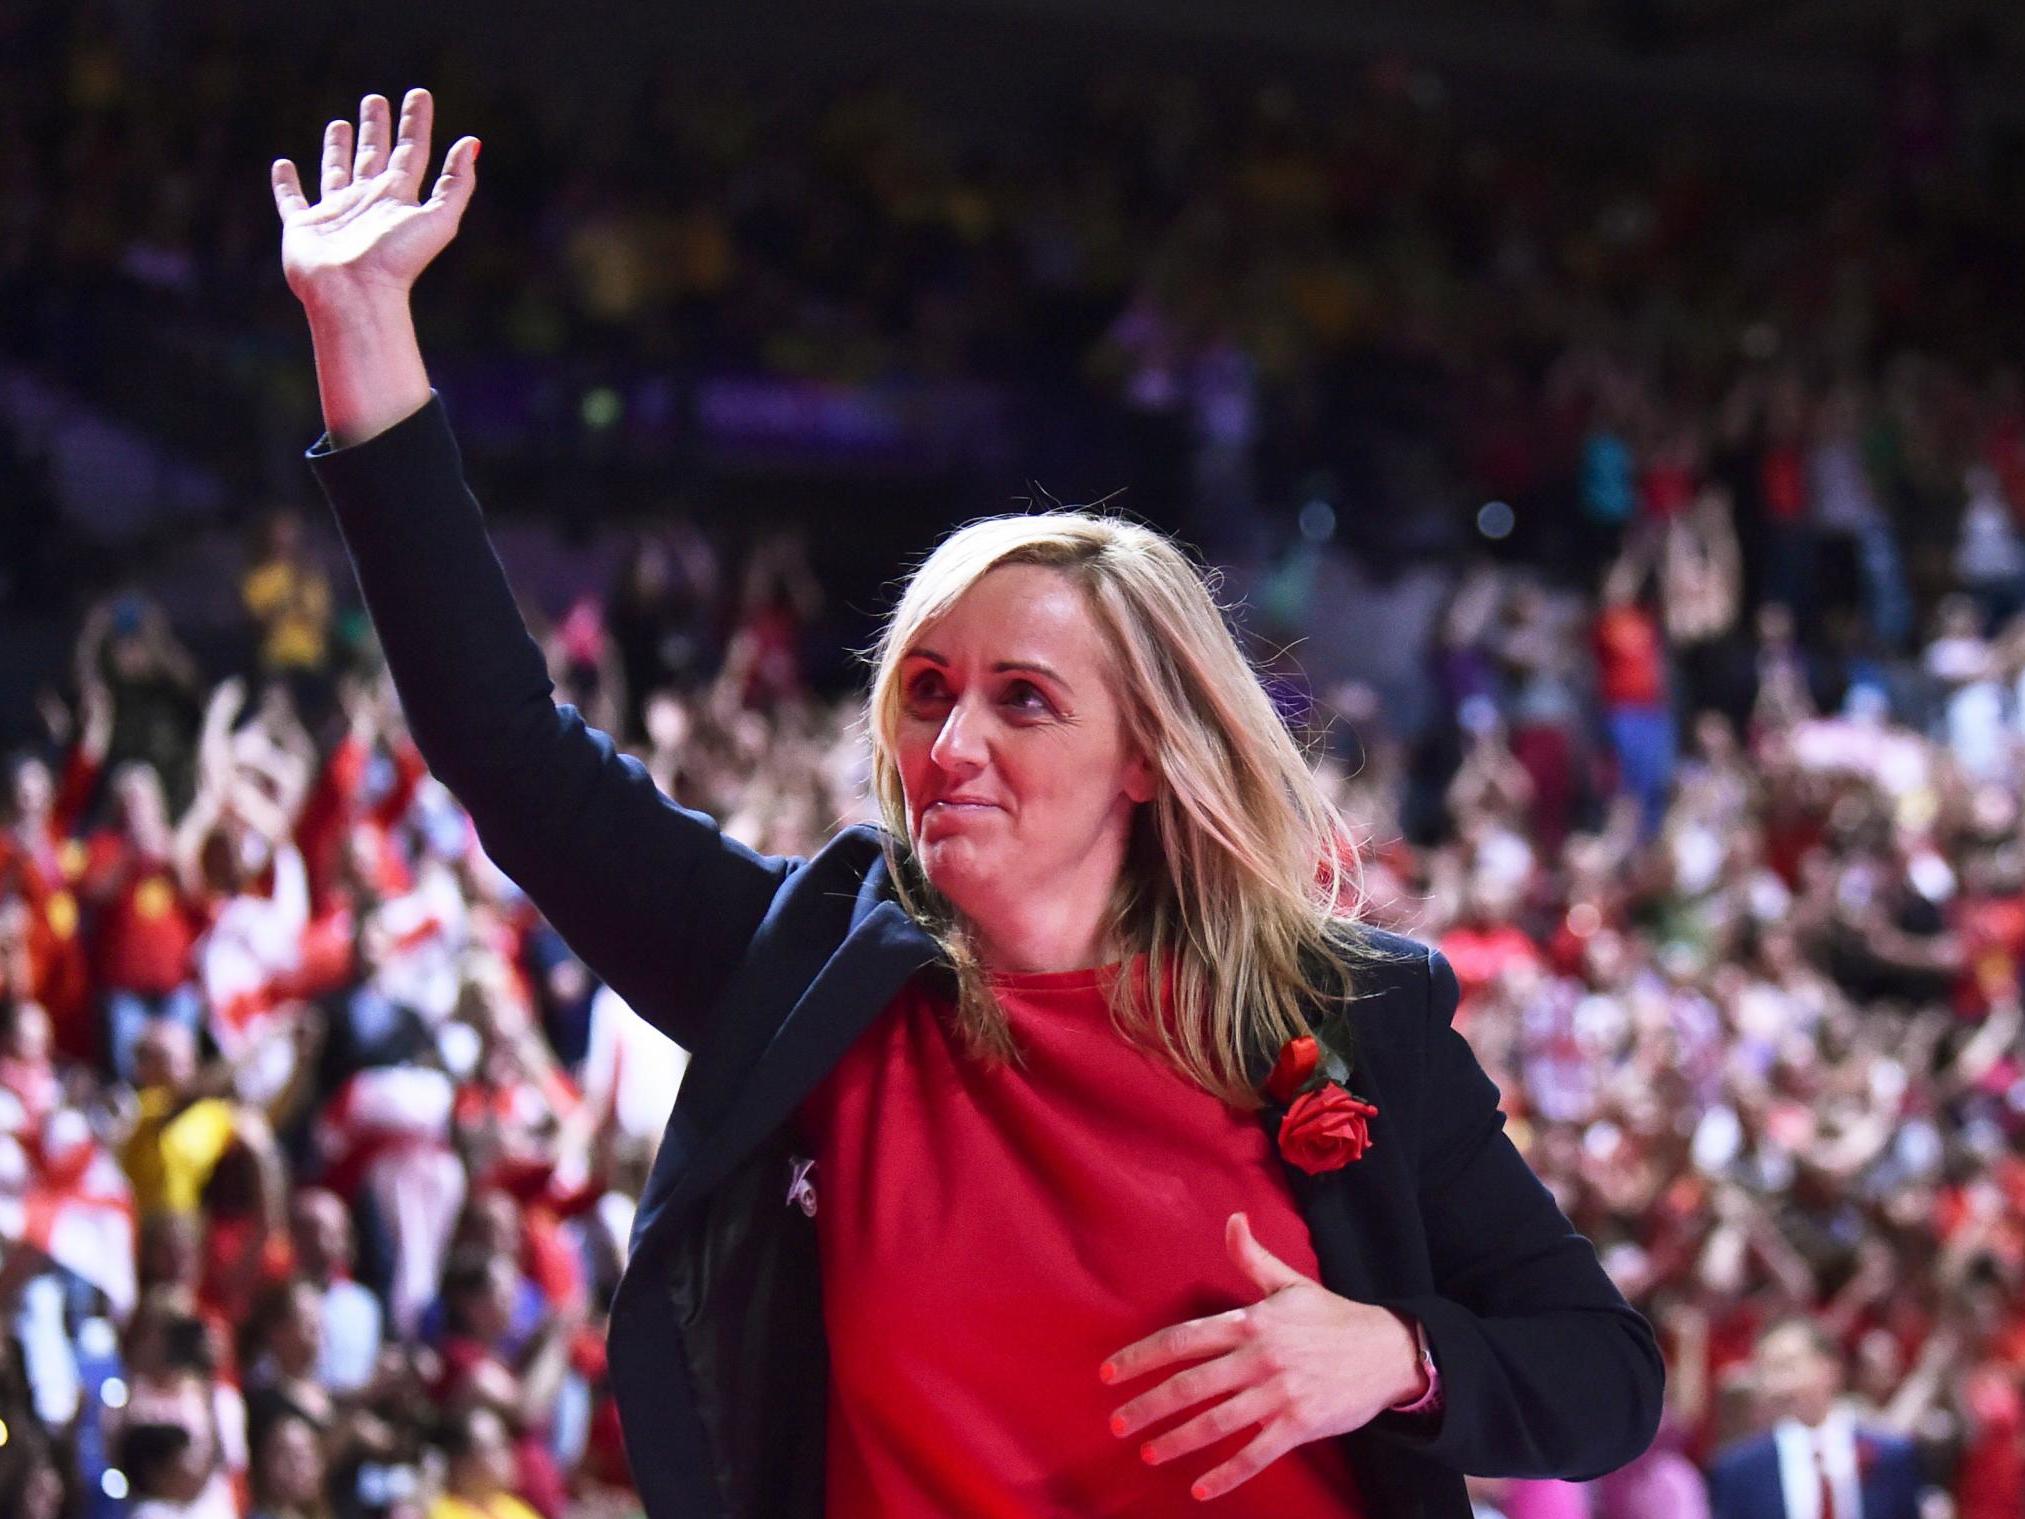 Tracey Neville has revealed she had a miscarriage after England Commonwealth gold